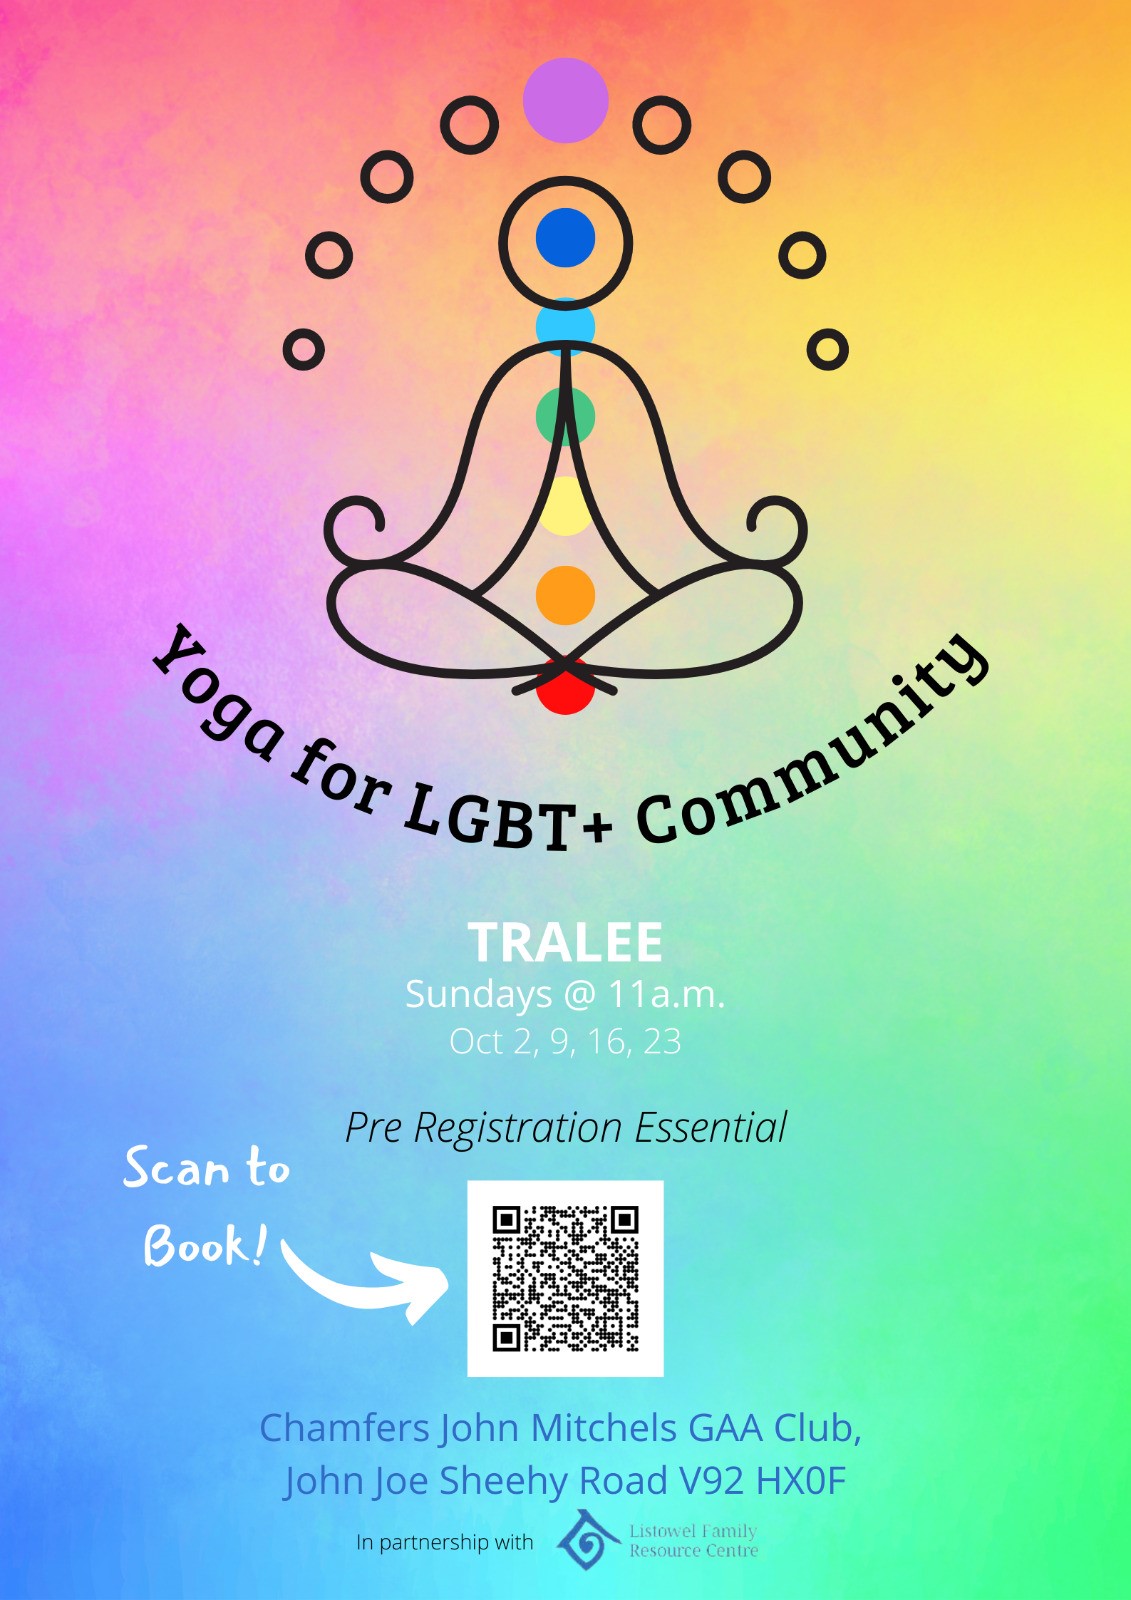 Yoga for the LGBT+ Community - Tralee event at Kerry Mental Health & Wellbeing Fest 2022